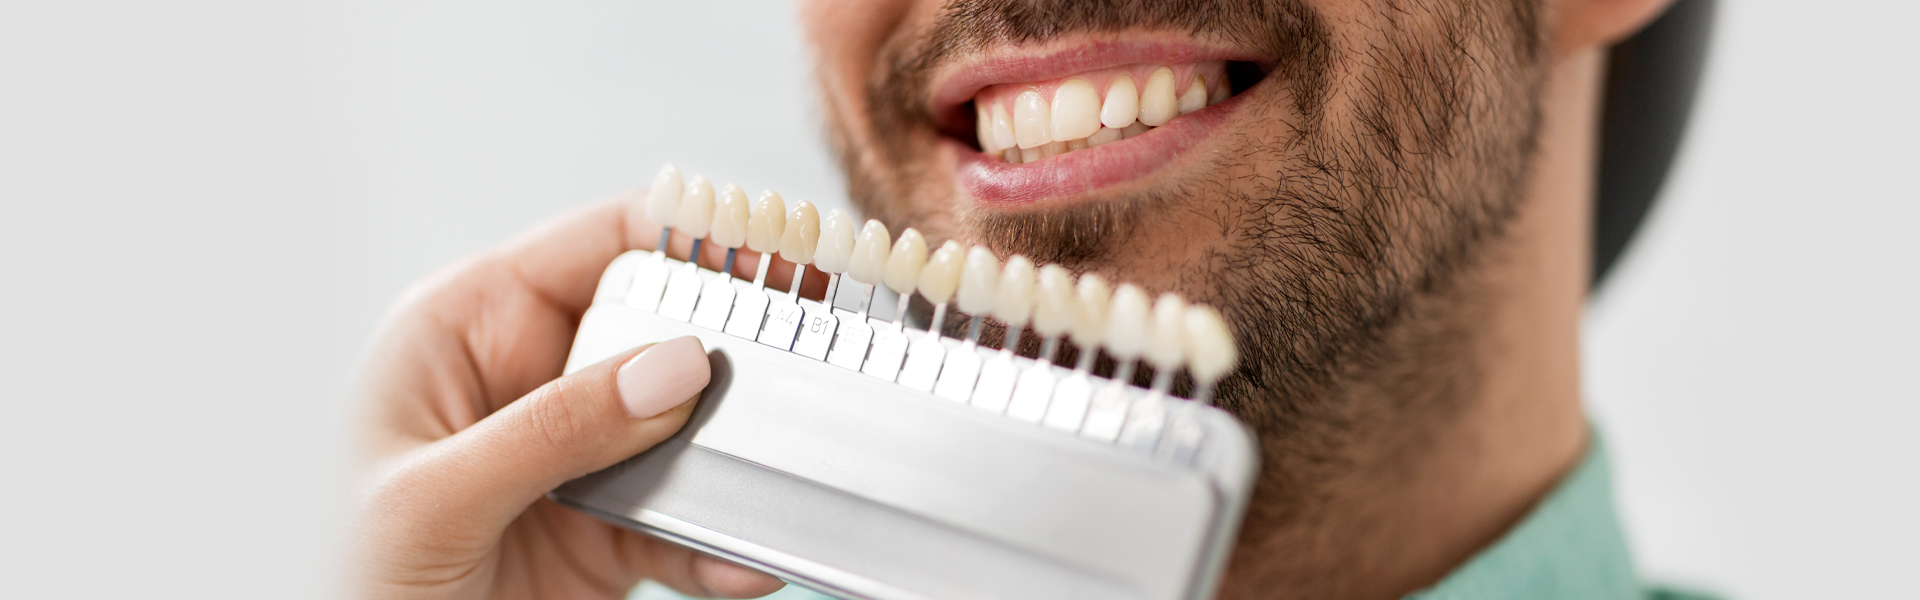 Dental Veneers: Easy & Pain-free Process for Reshaping your Smile